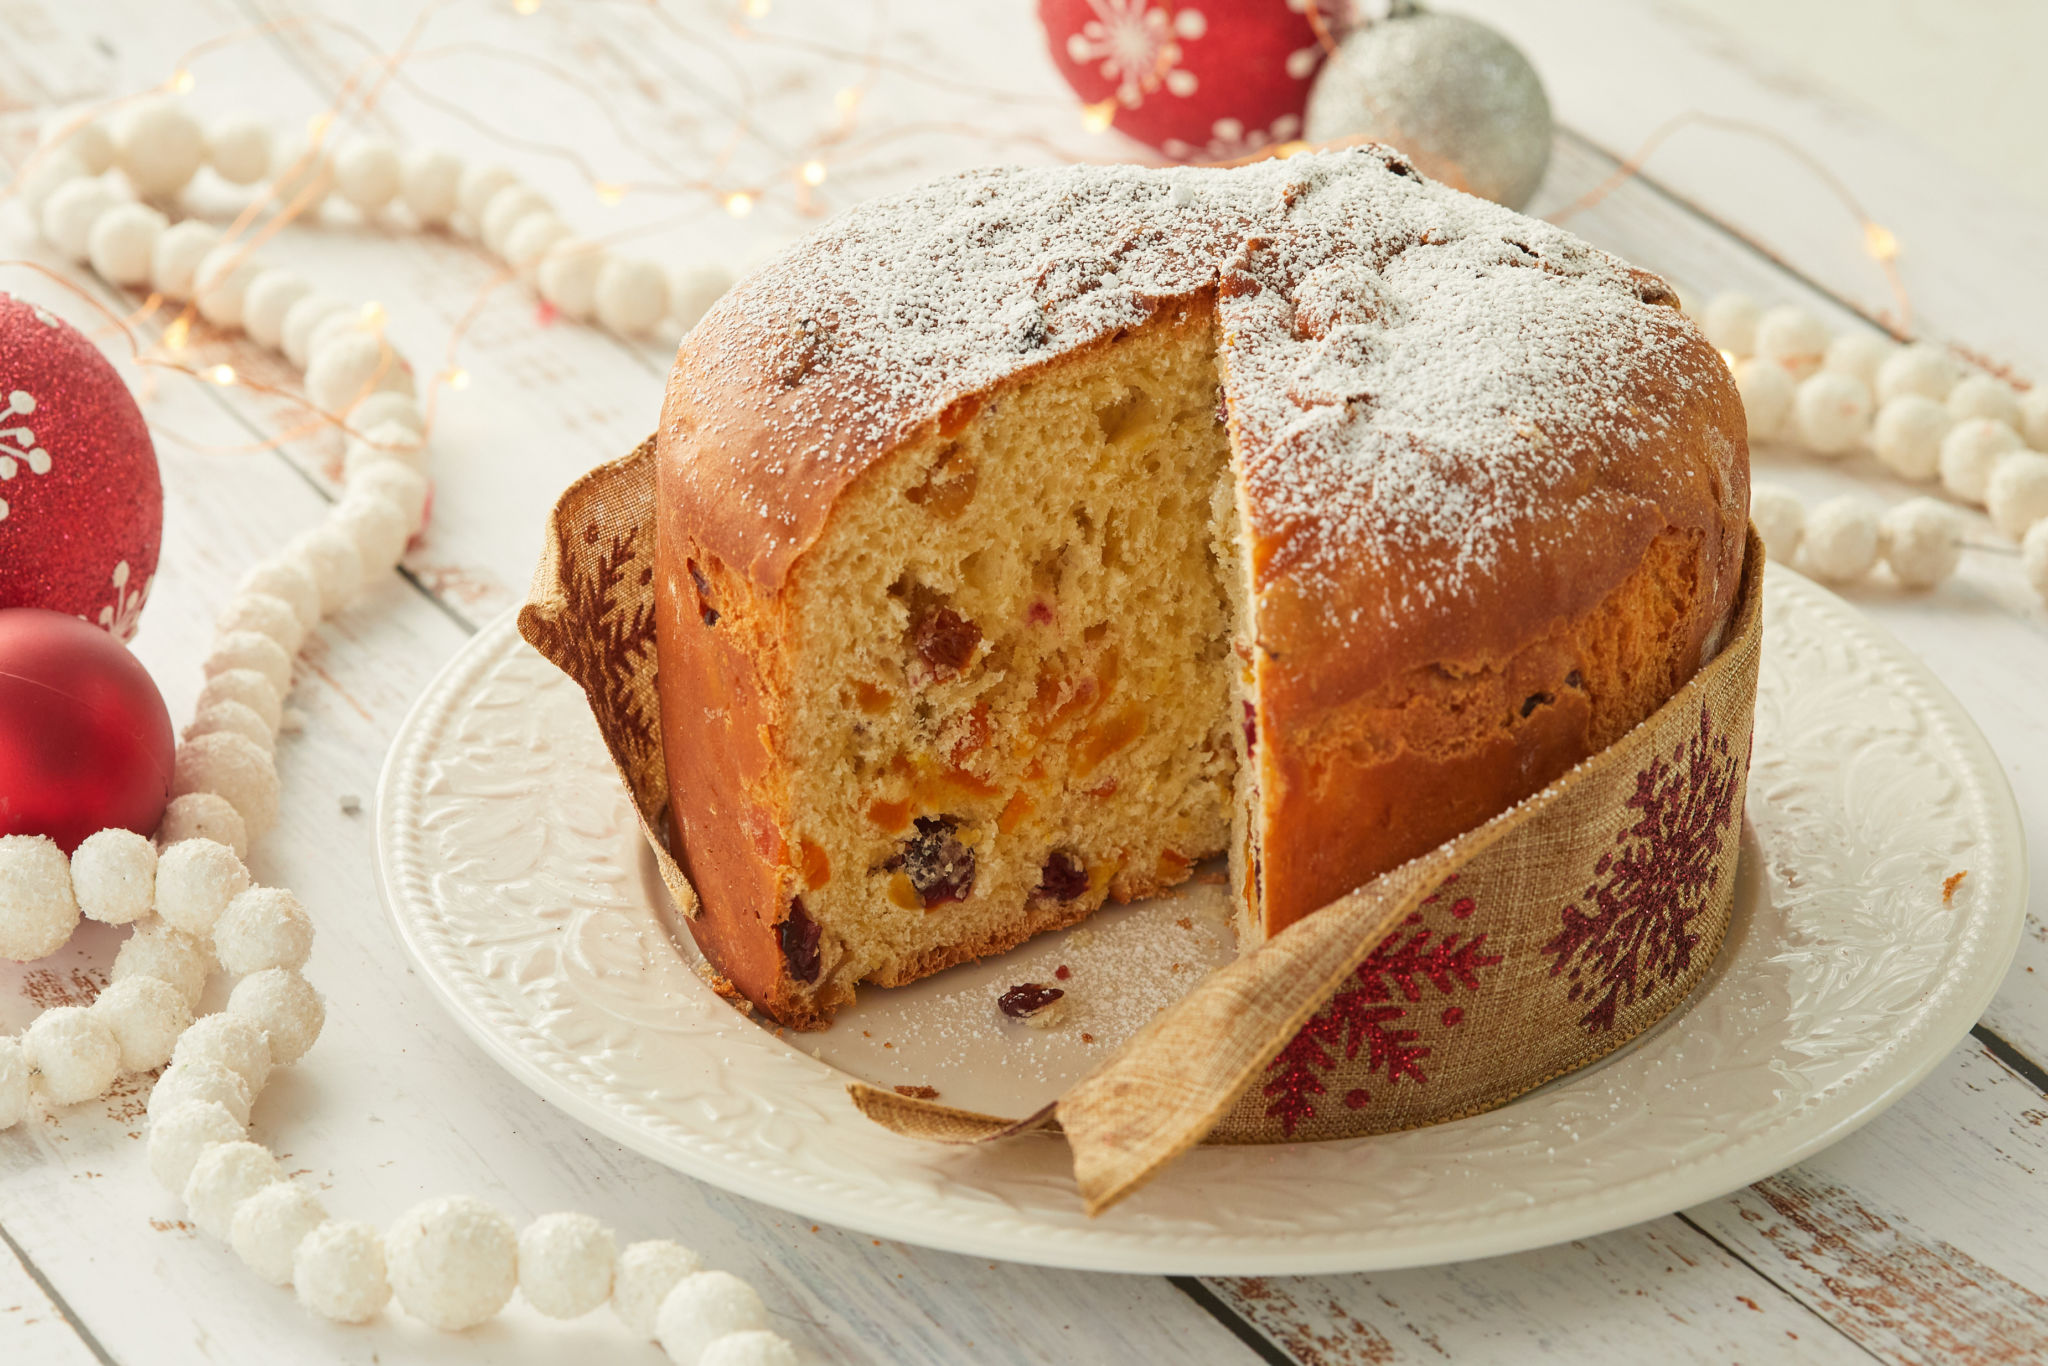 Panettone baked and sliced.